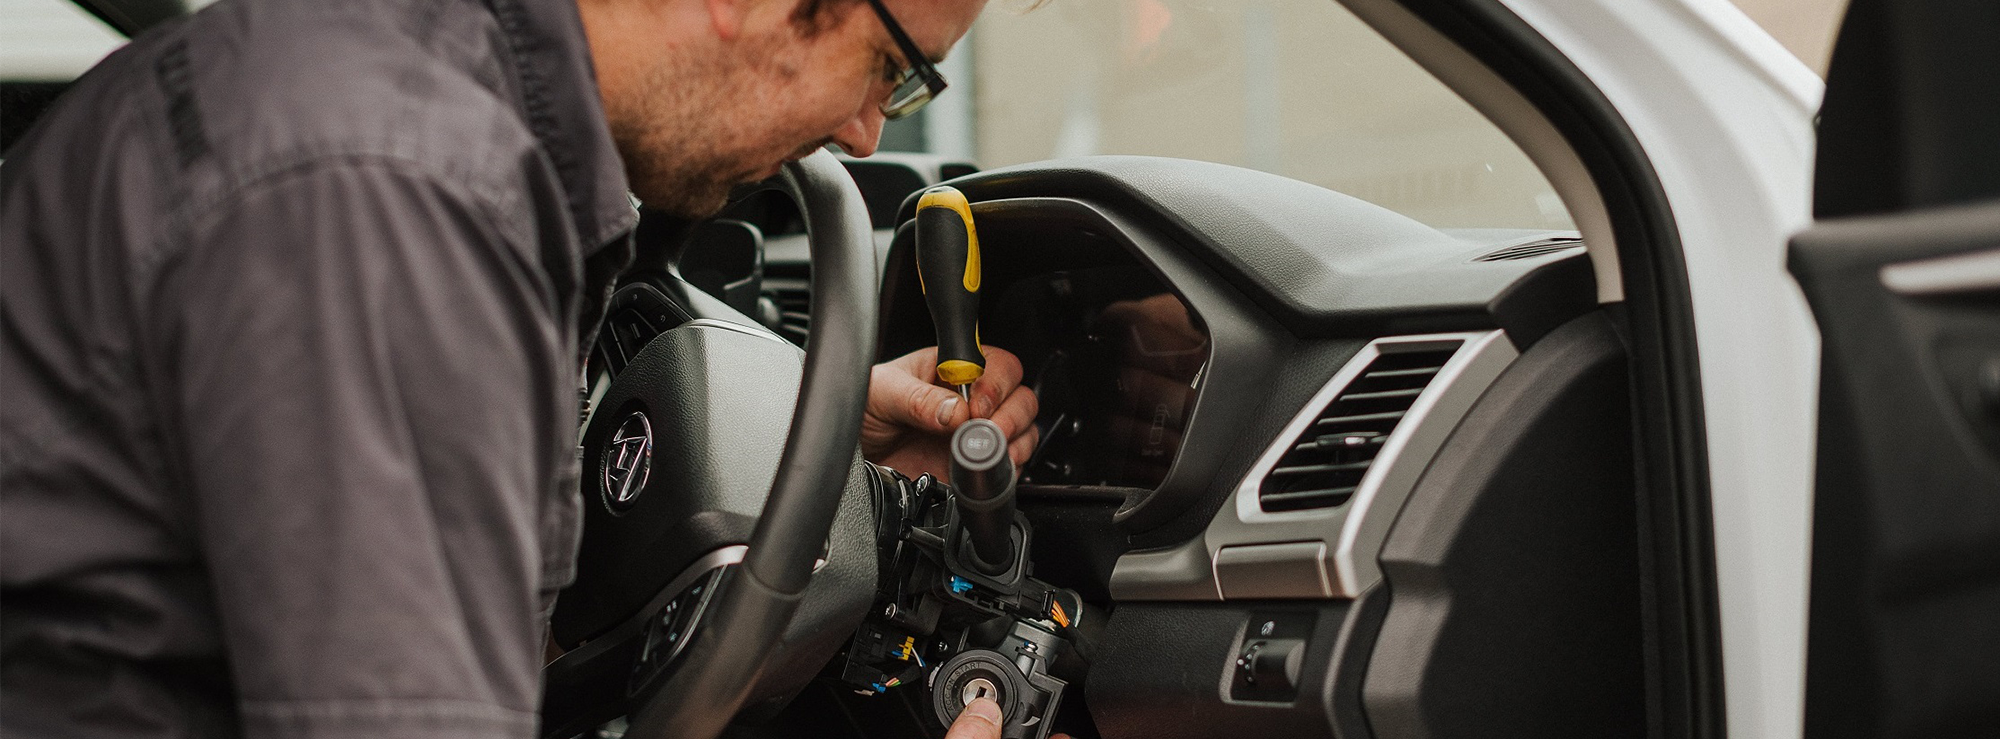 <h1>24hr Emergency Locksmiths</h1><p>Available 24 hours a day, 7 days a week. Call us for any vehicle or building lockouts and we can get you sorted.</p><button>Contact Us</button>